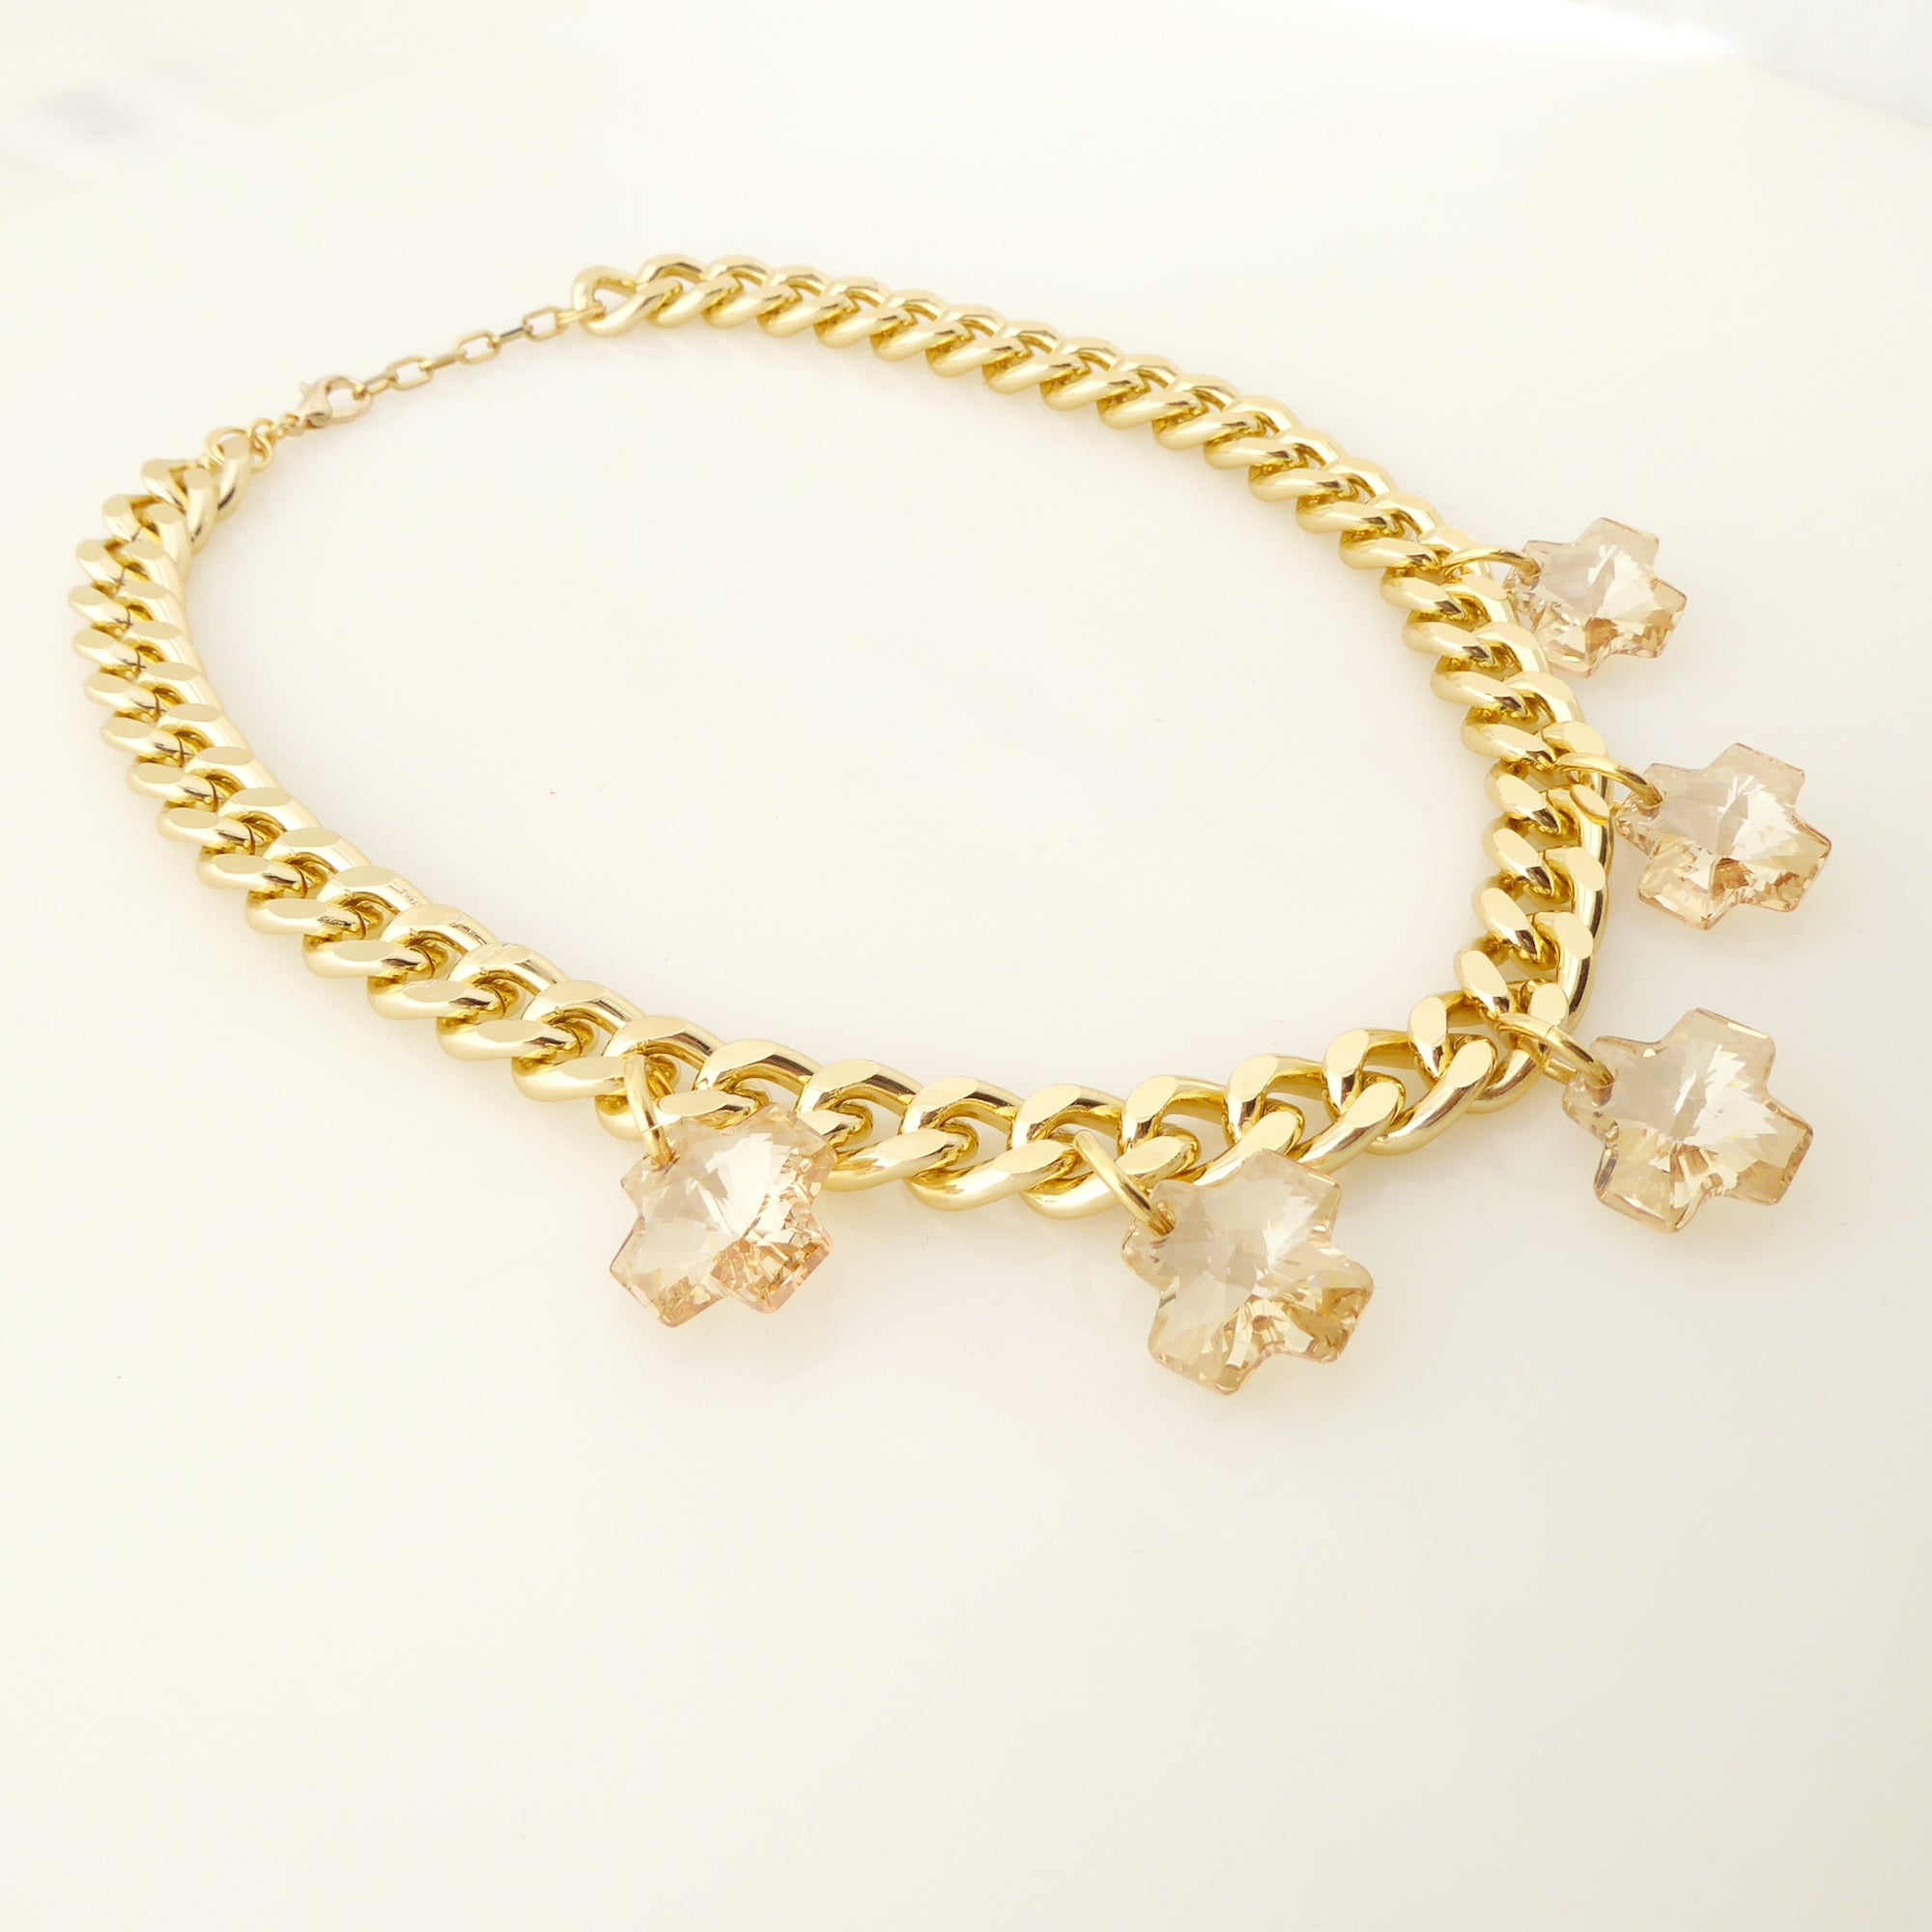 Golden crystal cross necklace